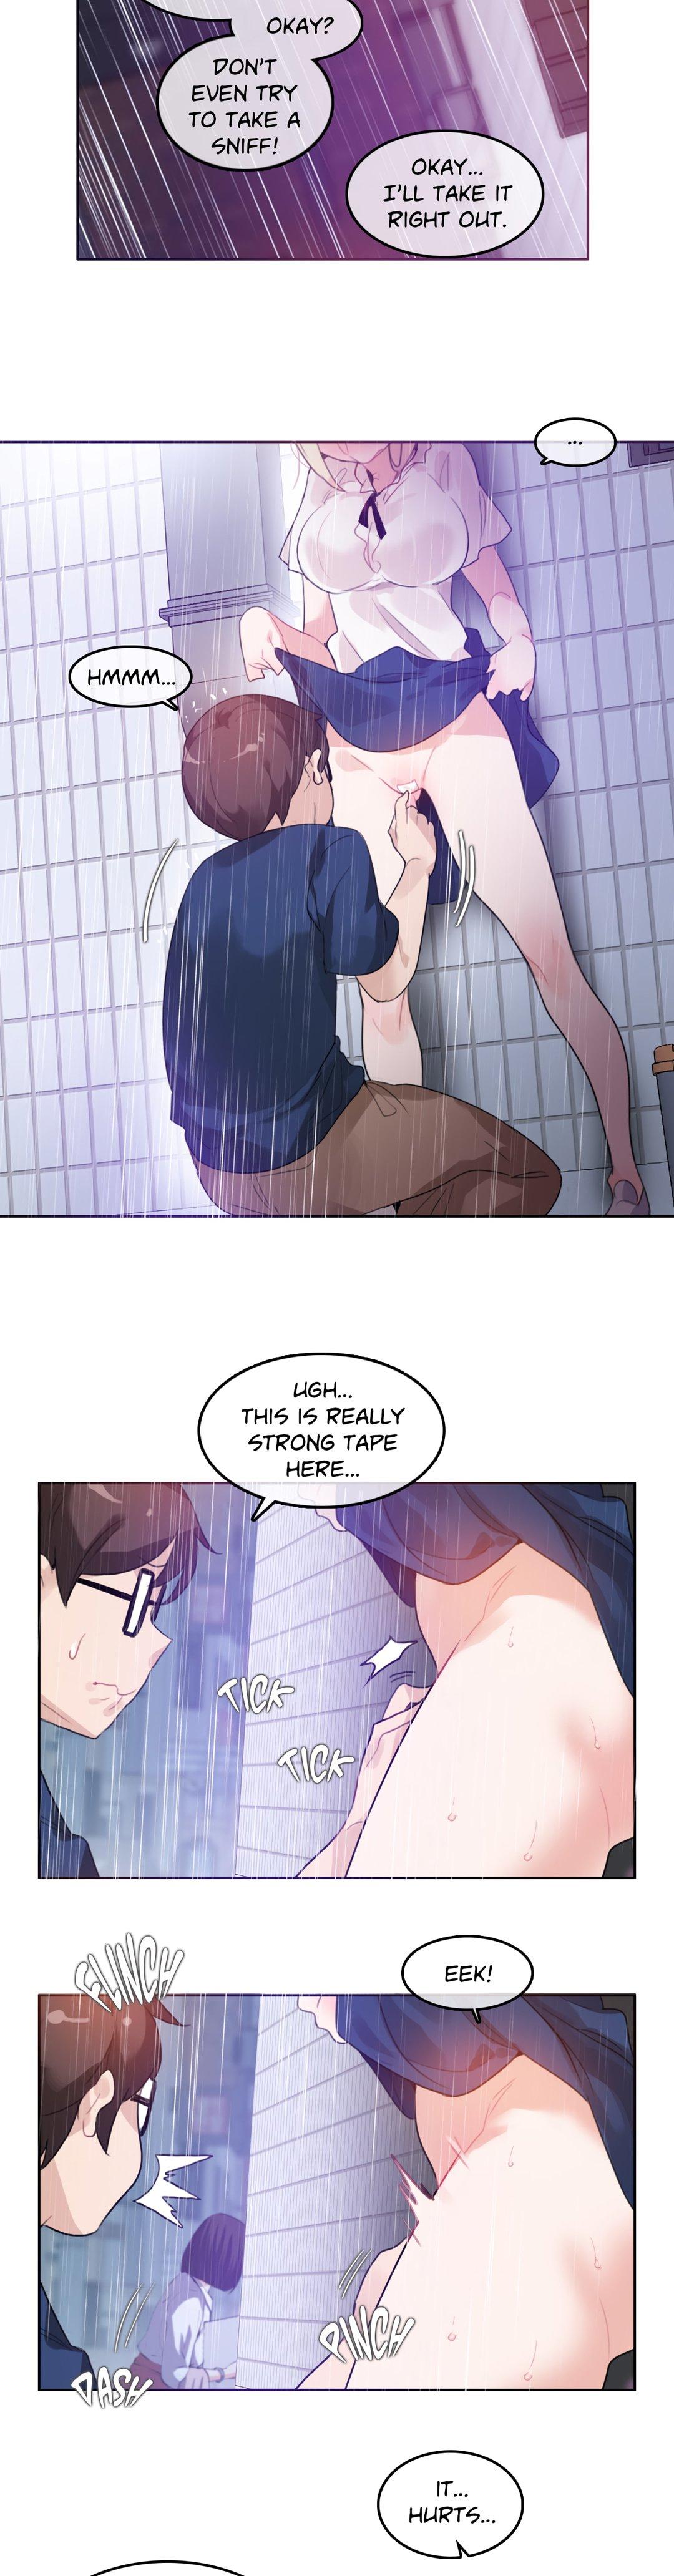 A Pervert's Daily Life • Chapter 36-40 8